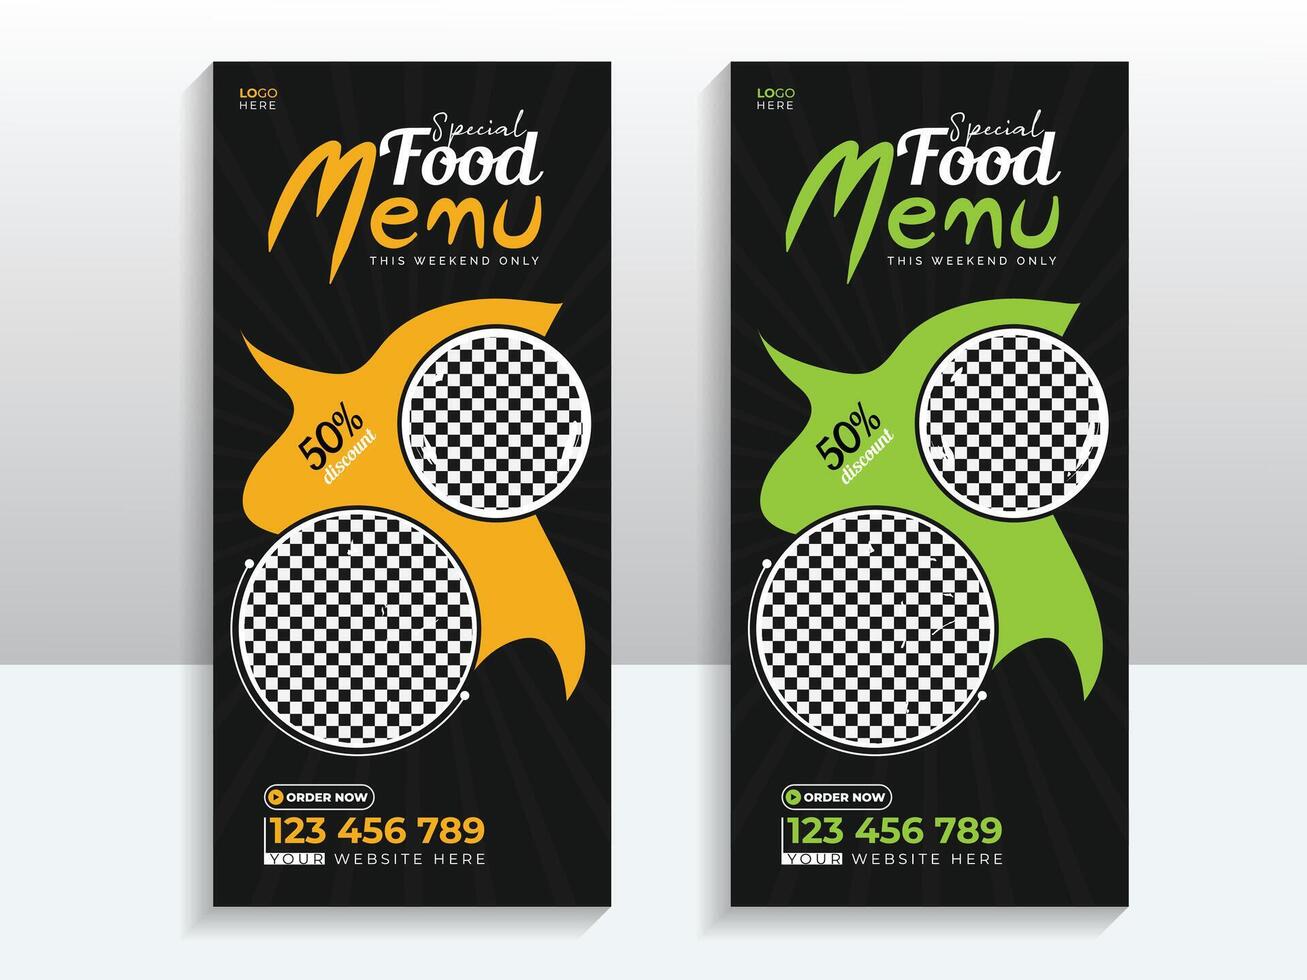 Food menu roll up banner template for restaurant or food business vector